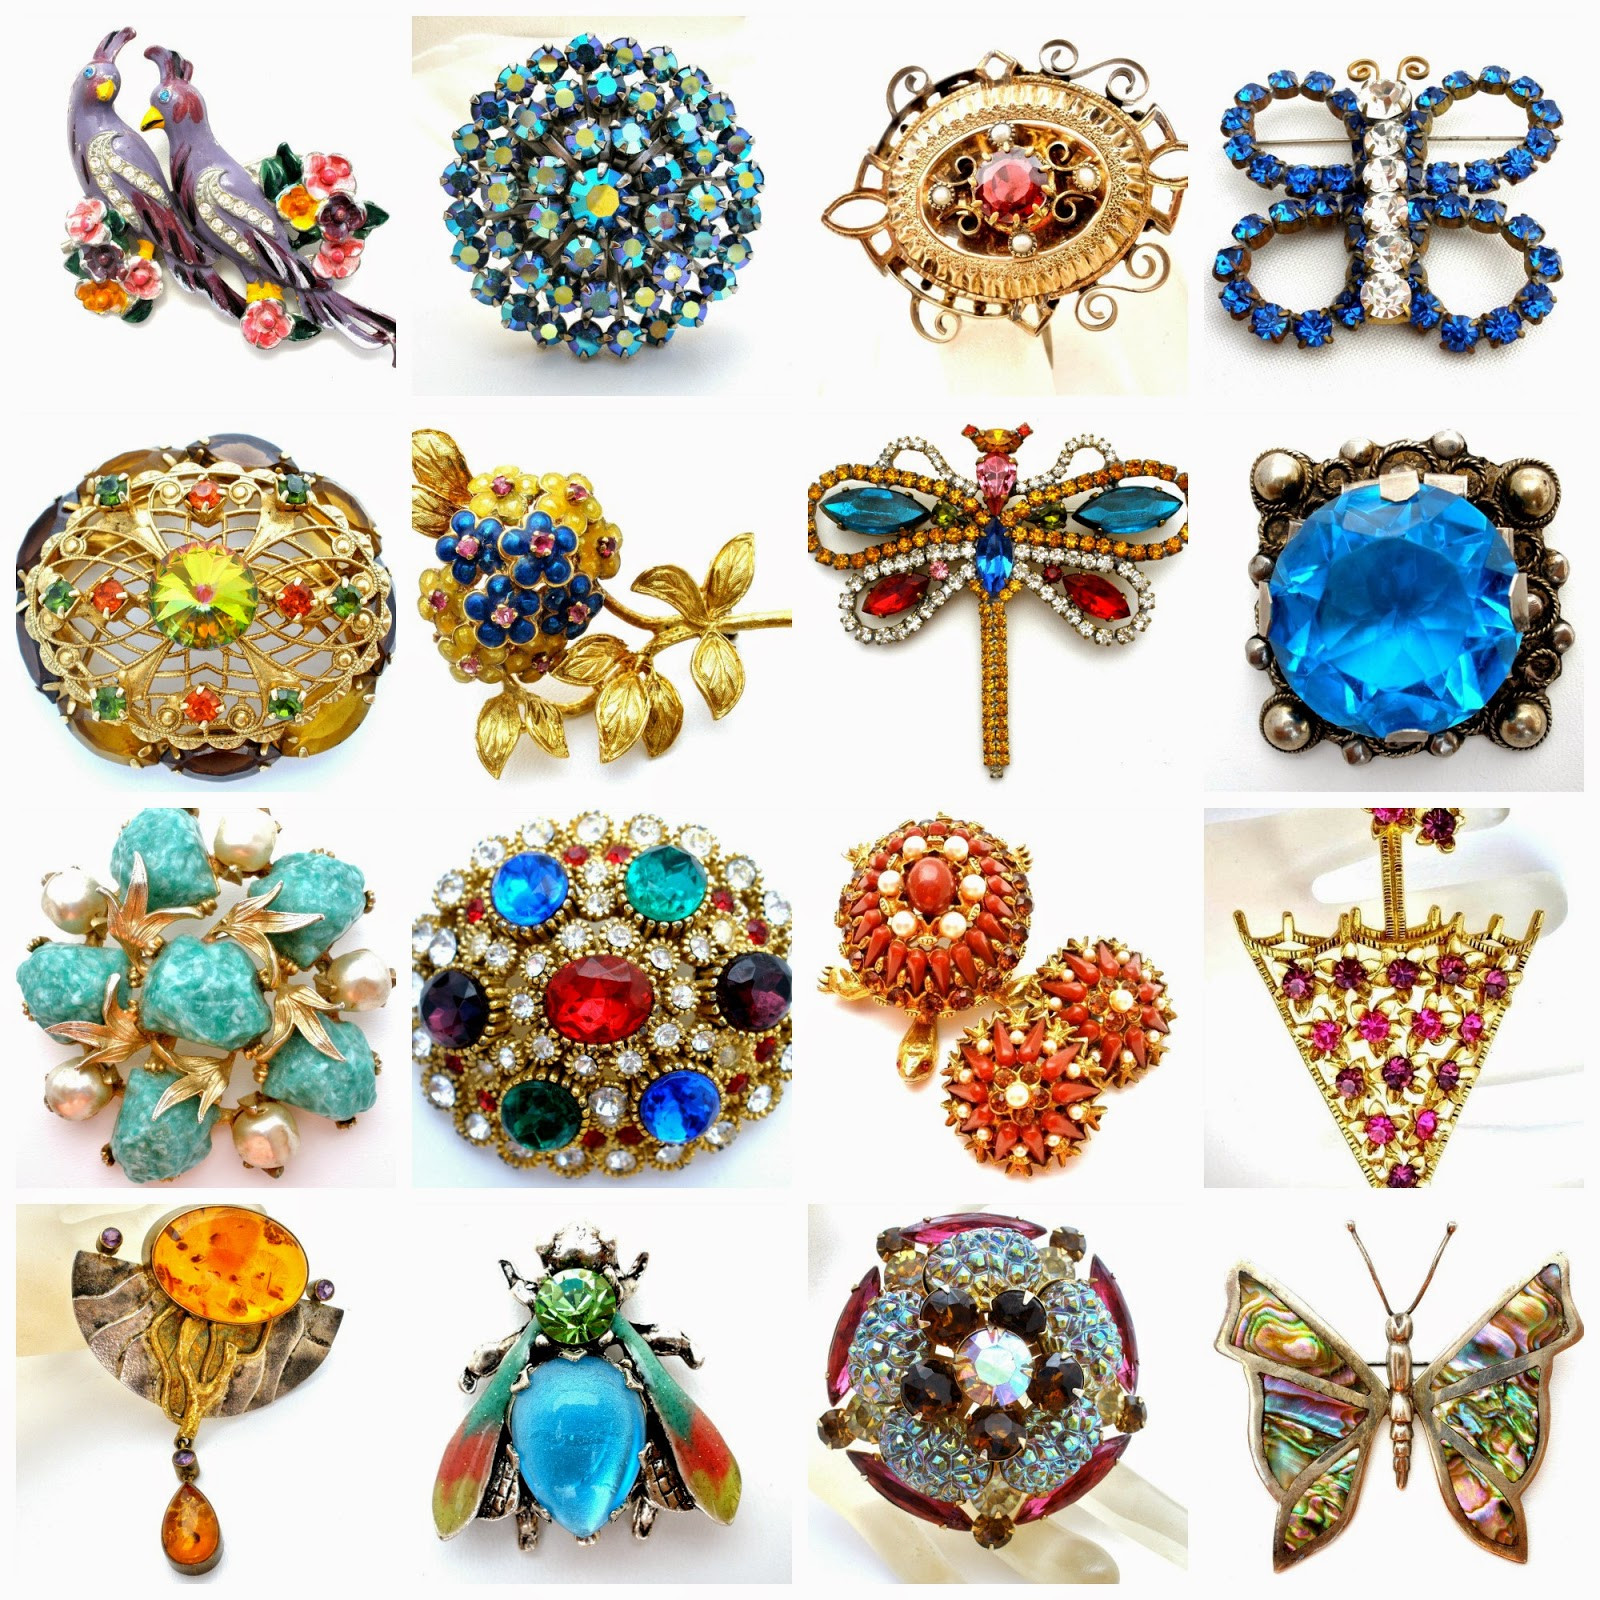 Pins Jewelry The Jewelry Lady s Store Vintage And Antique Brooches